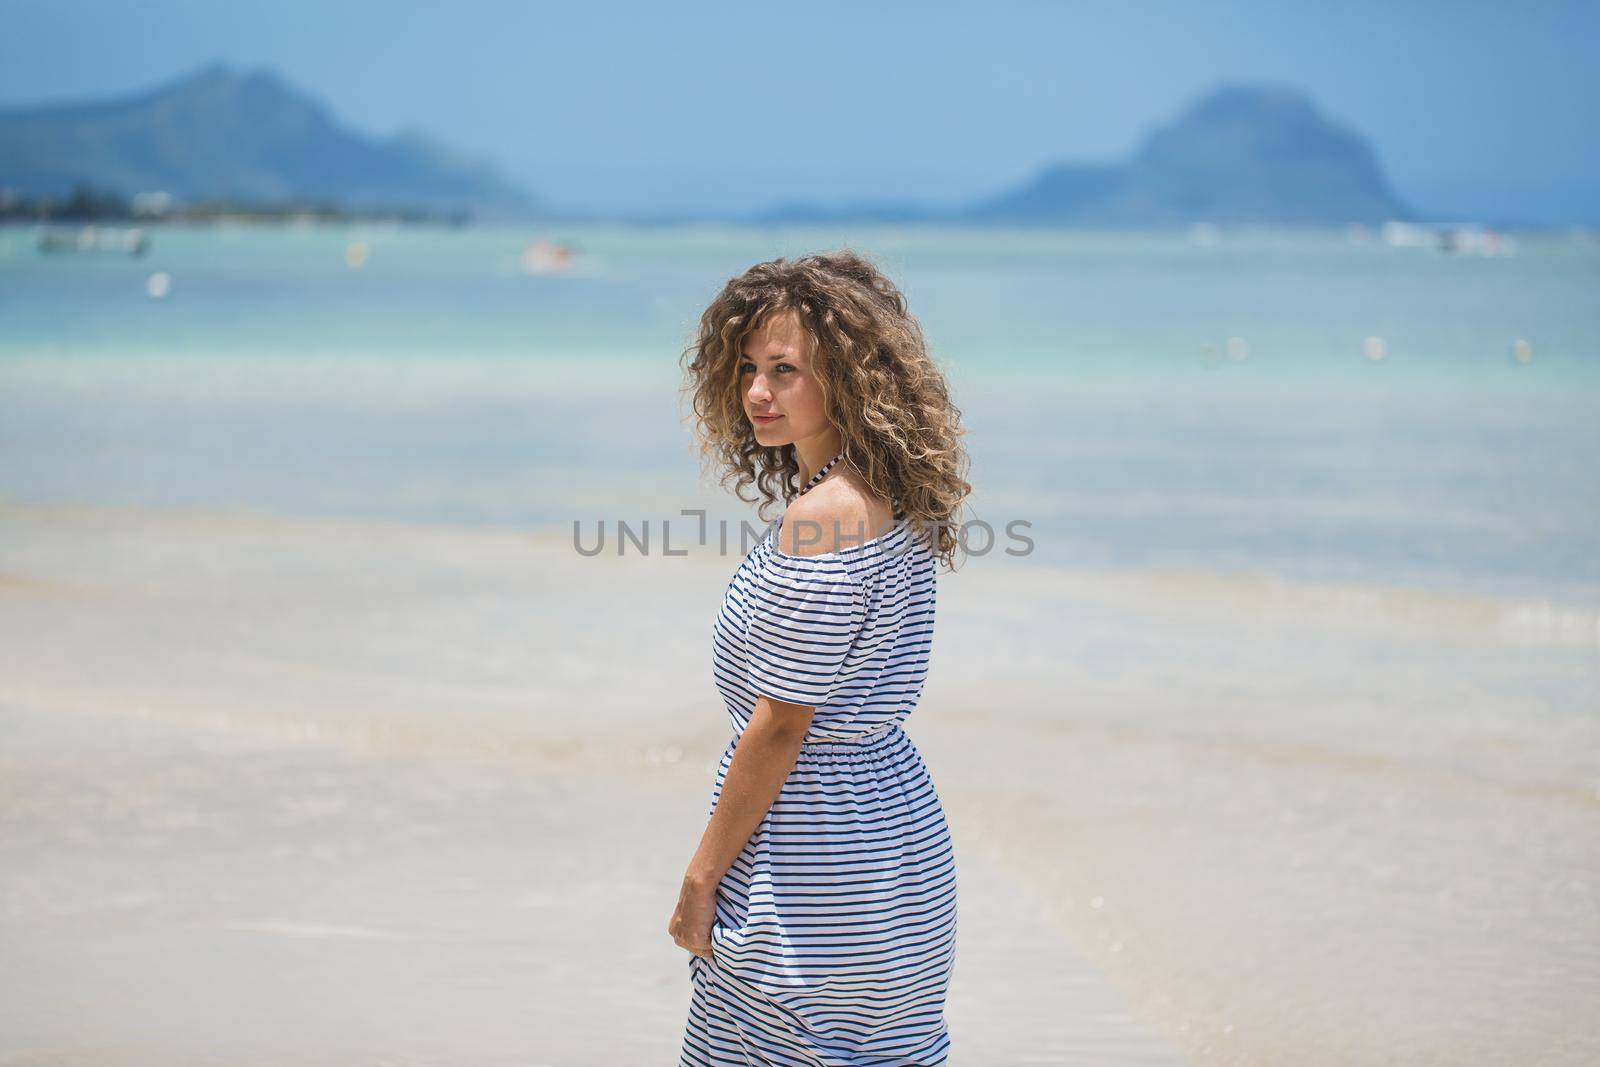 Beautiful girl in the Indian ocean with mountains in the background by StudioPeace